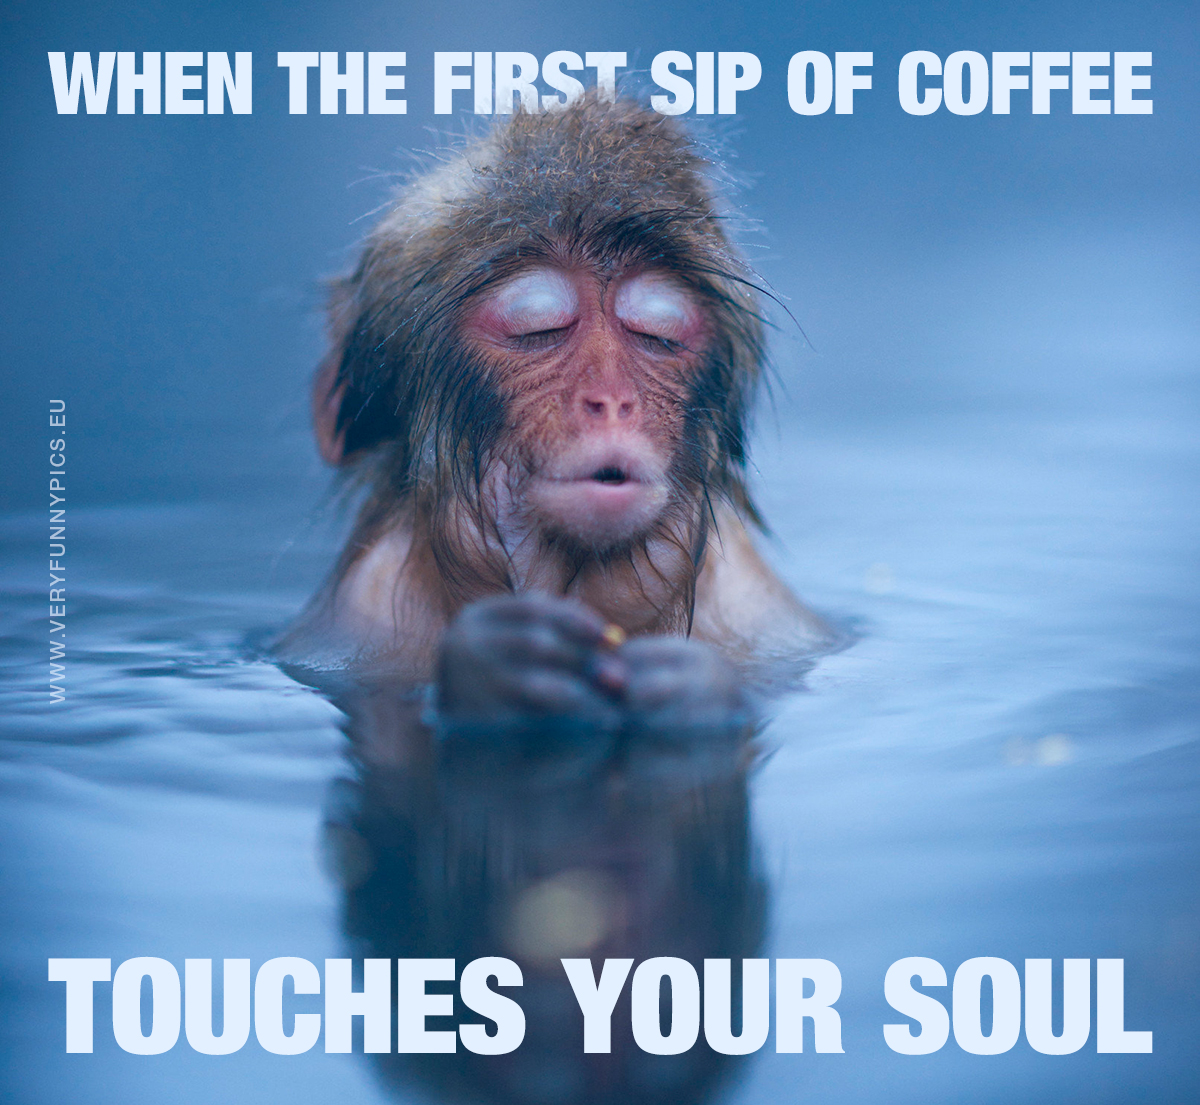 Monkey in water - When the first sip of coffee touches your soul